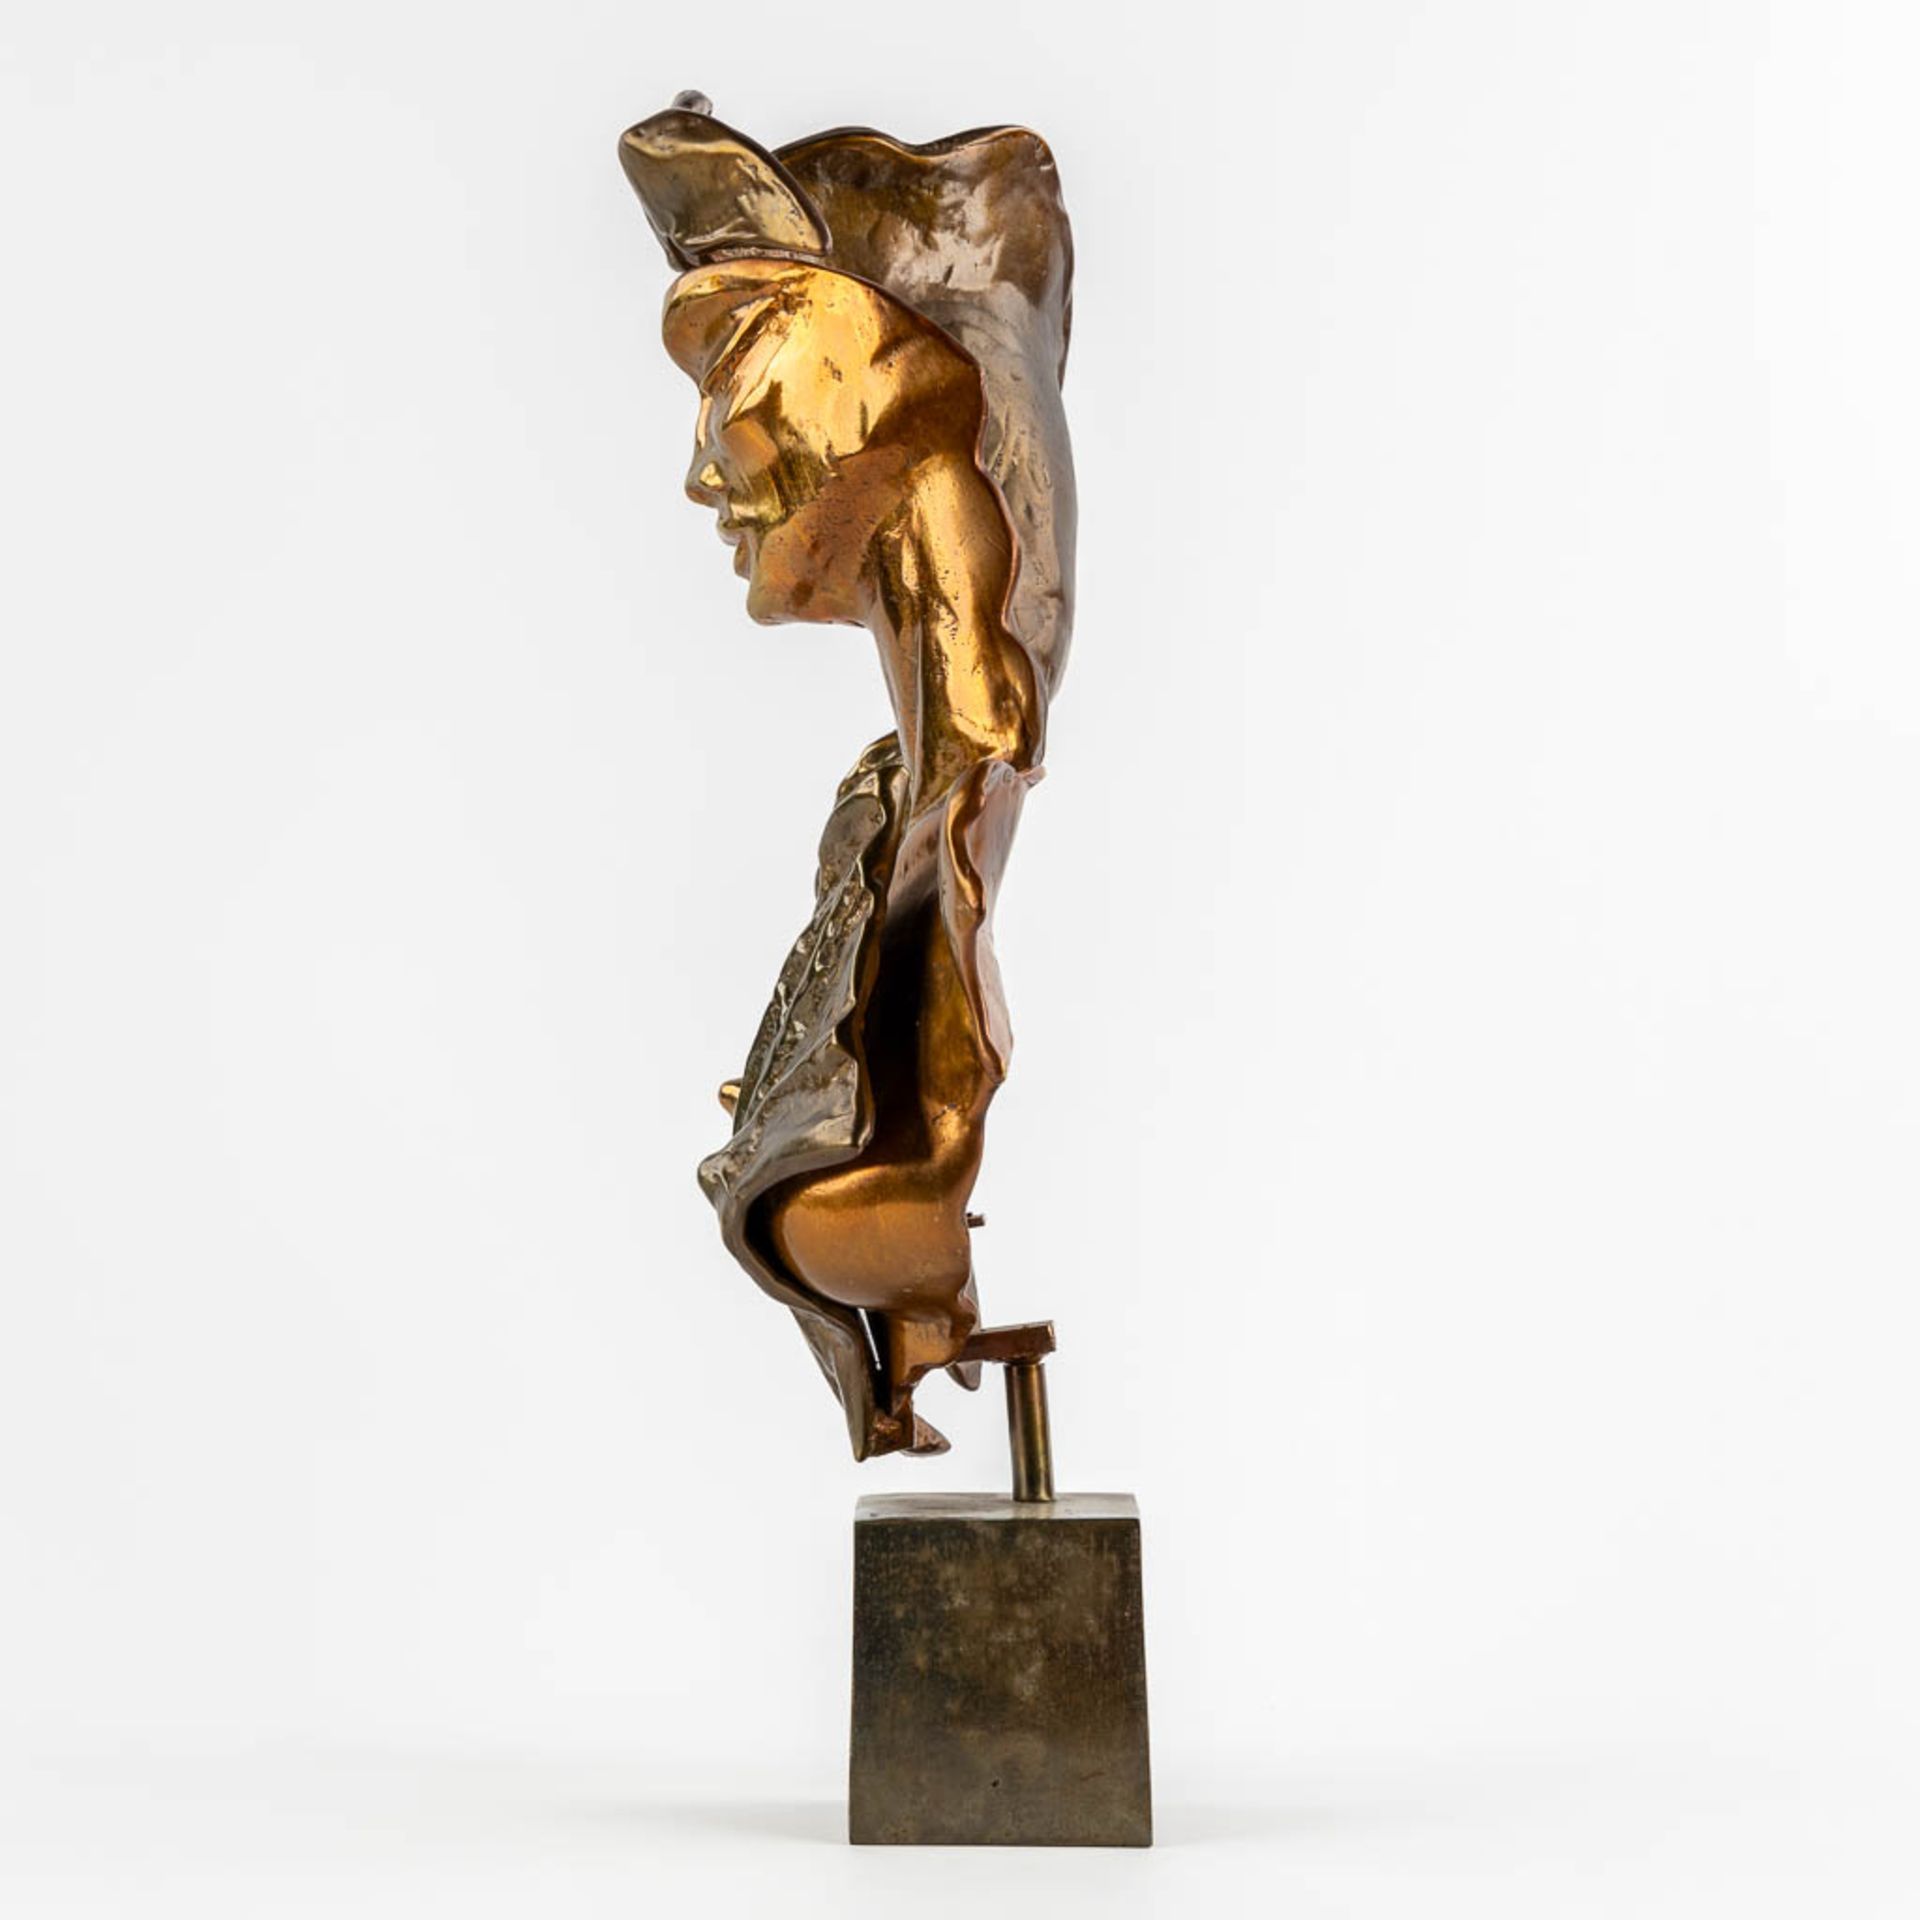 Yves LOHE (1947) 'Figure of a Lady' patinated bronze. (L:13 x W:29 x H:54 cm) - Image 4 of 10